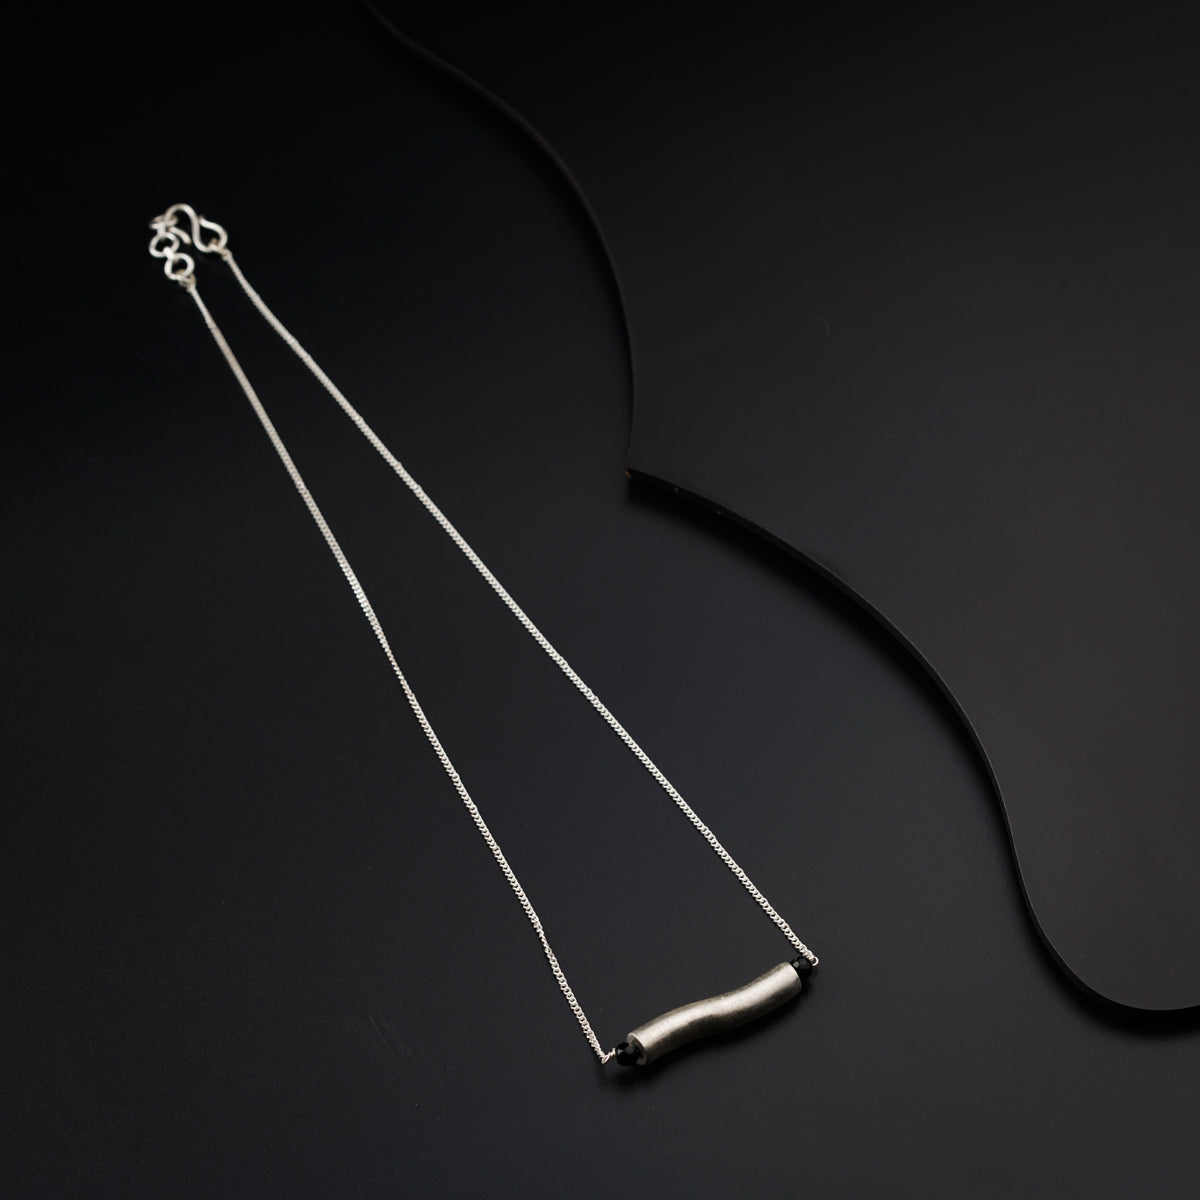 a pair of silver necklaces on a black surface